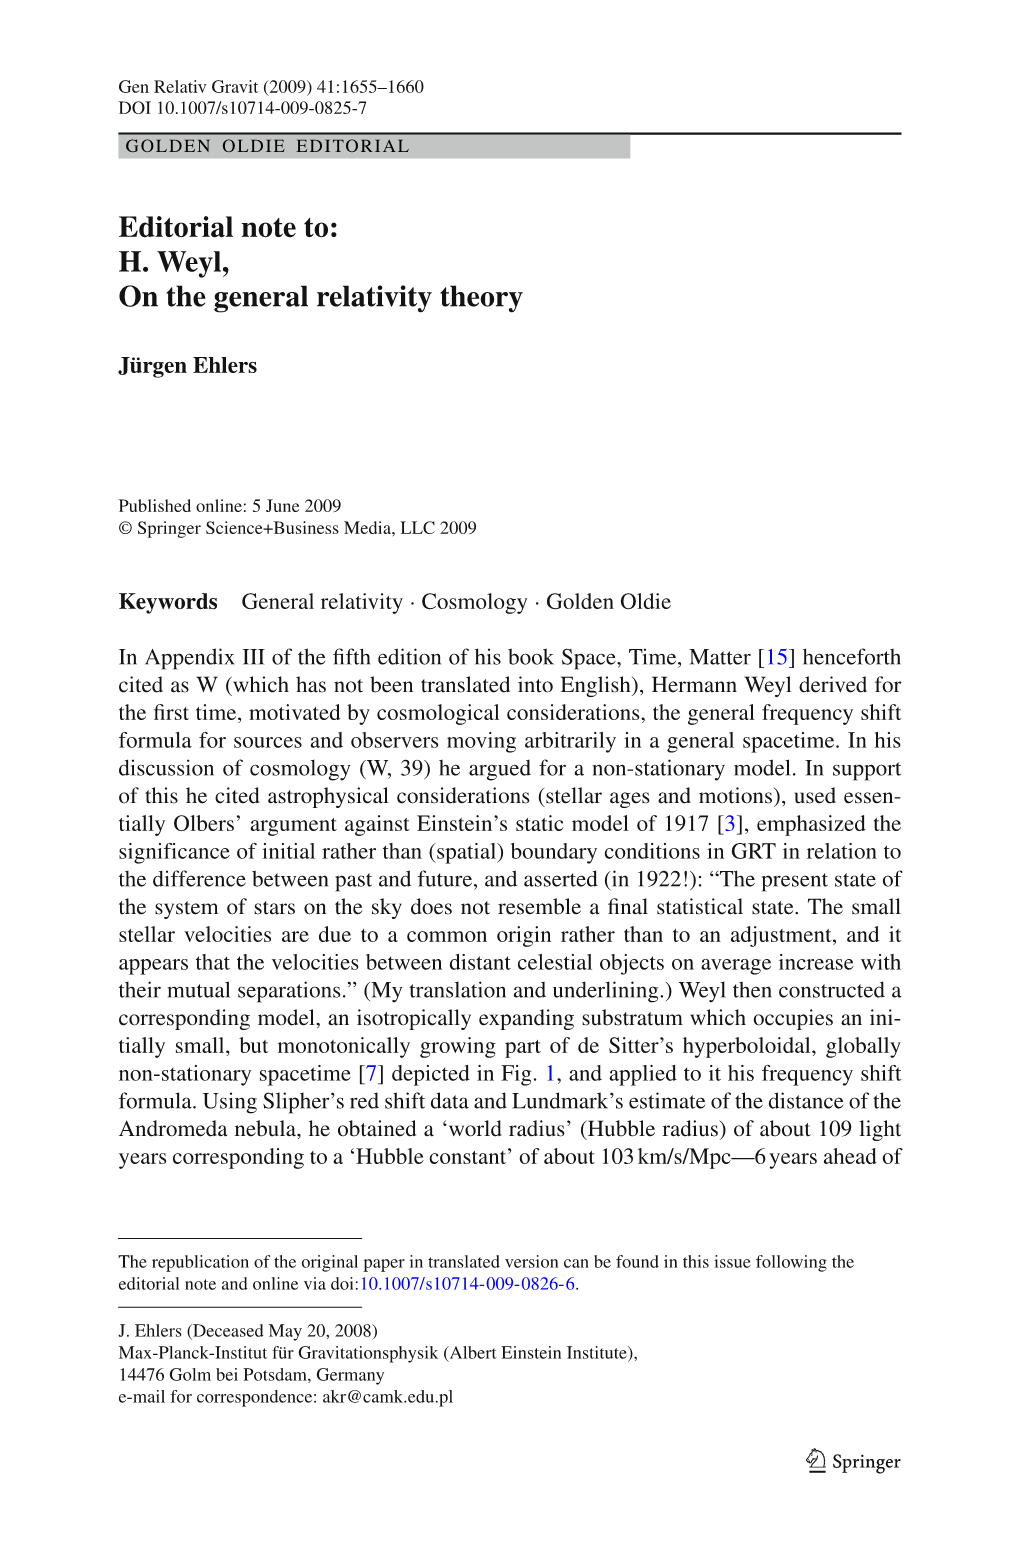 Editorial Note To: H. Weyl, on the General Relativity Theory